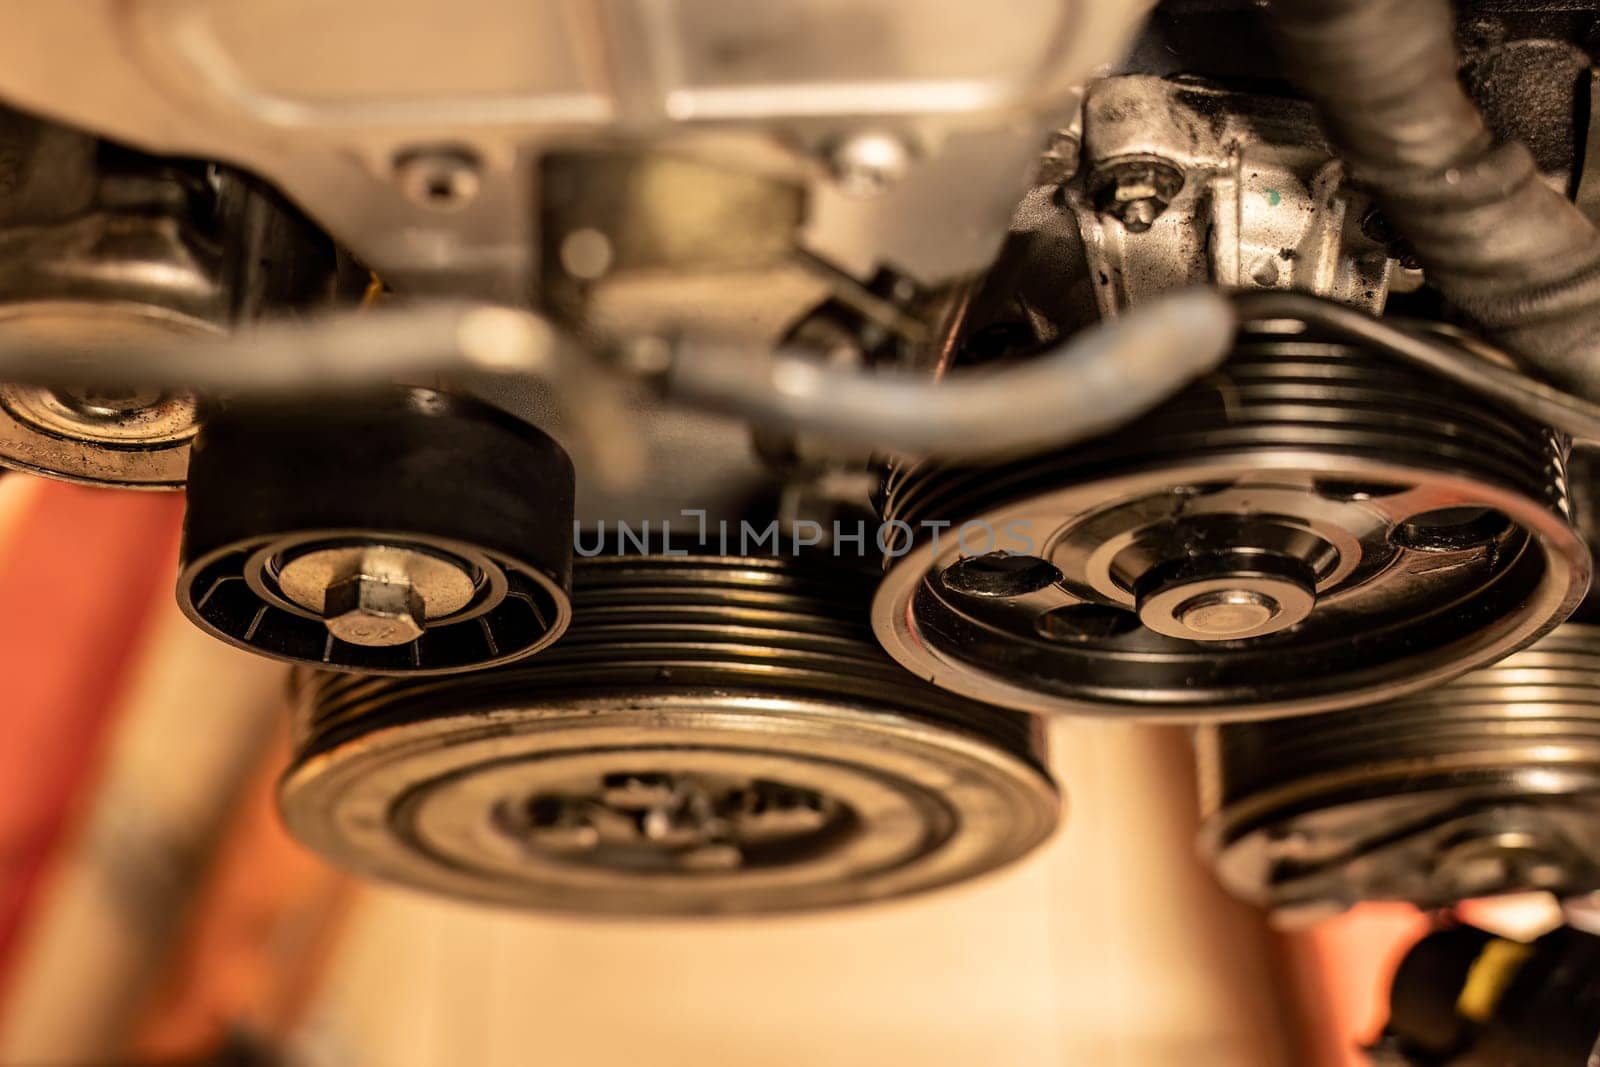 A close-up photo capturing the detailed view of a pulley in a car engine, epitomizing maintenance concepts.